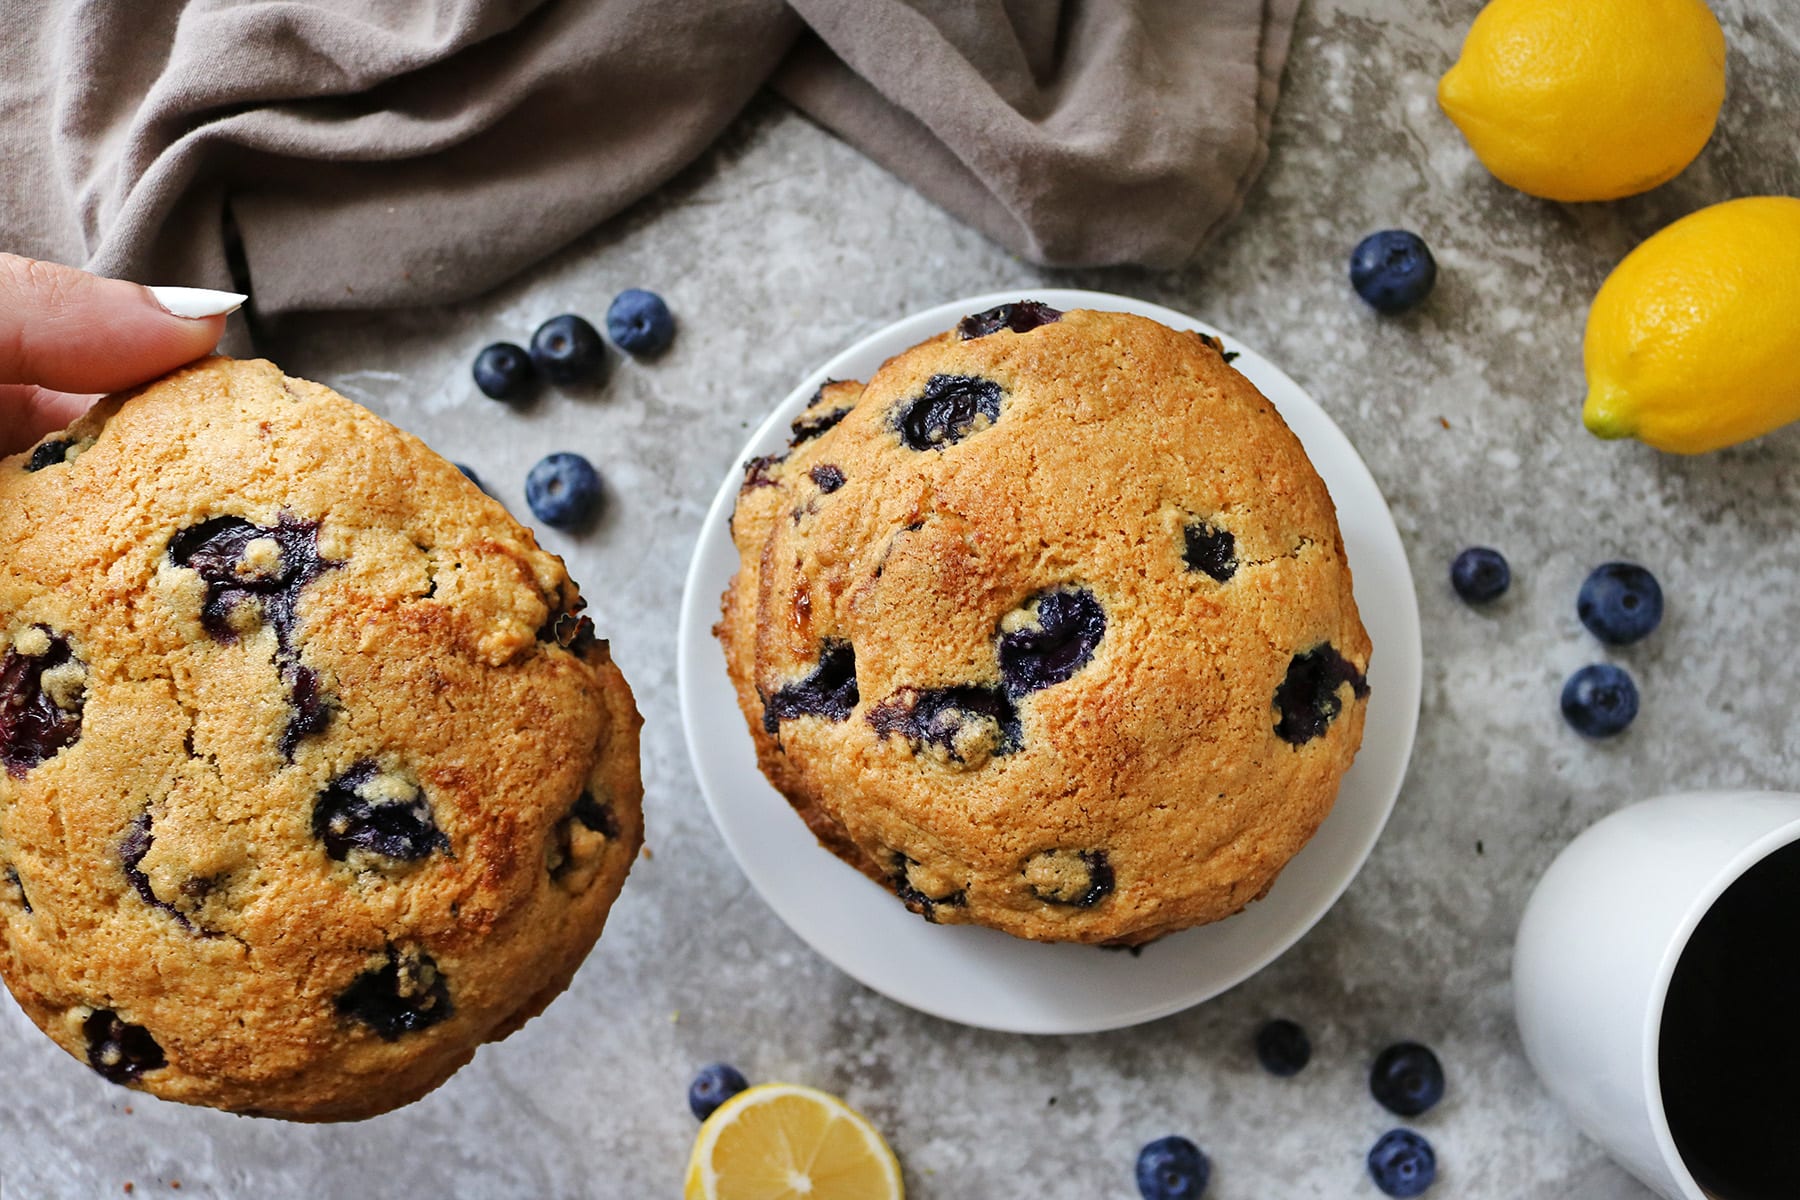 Blueberry Muffins Tops with Streusel